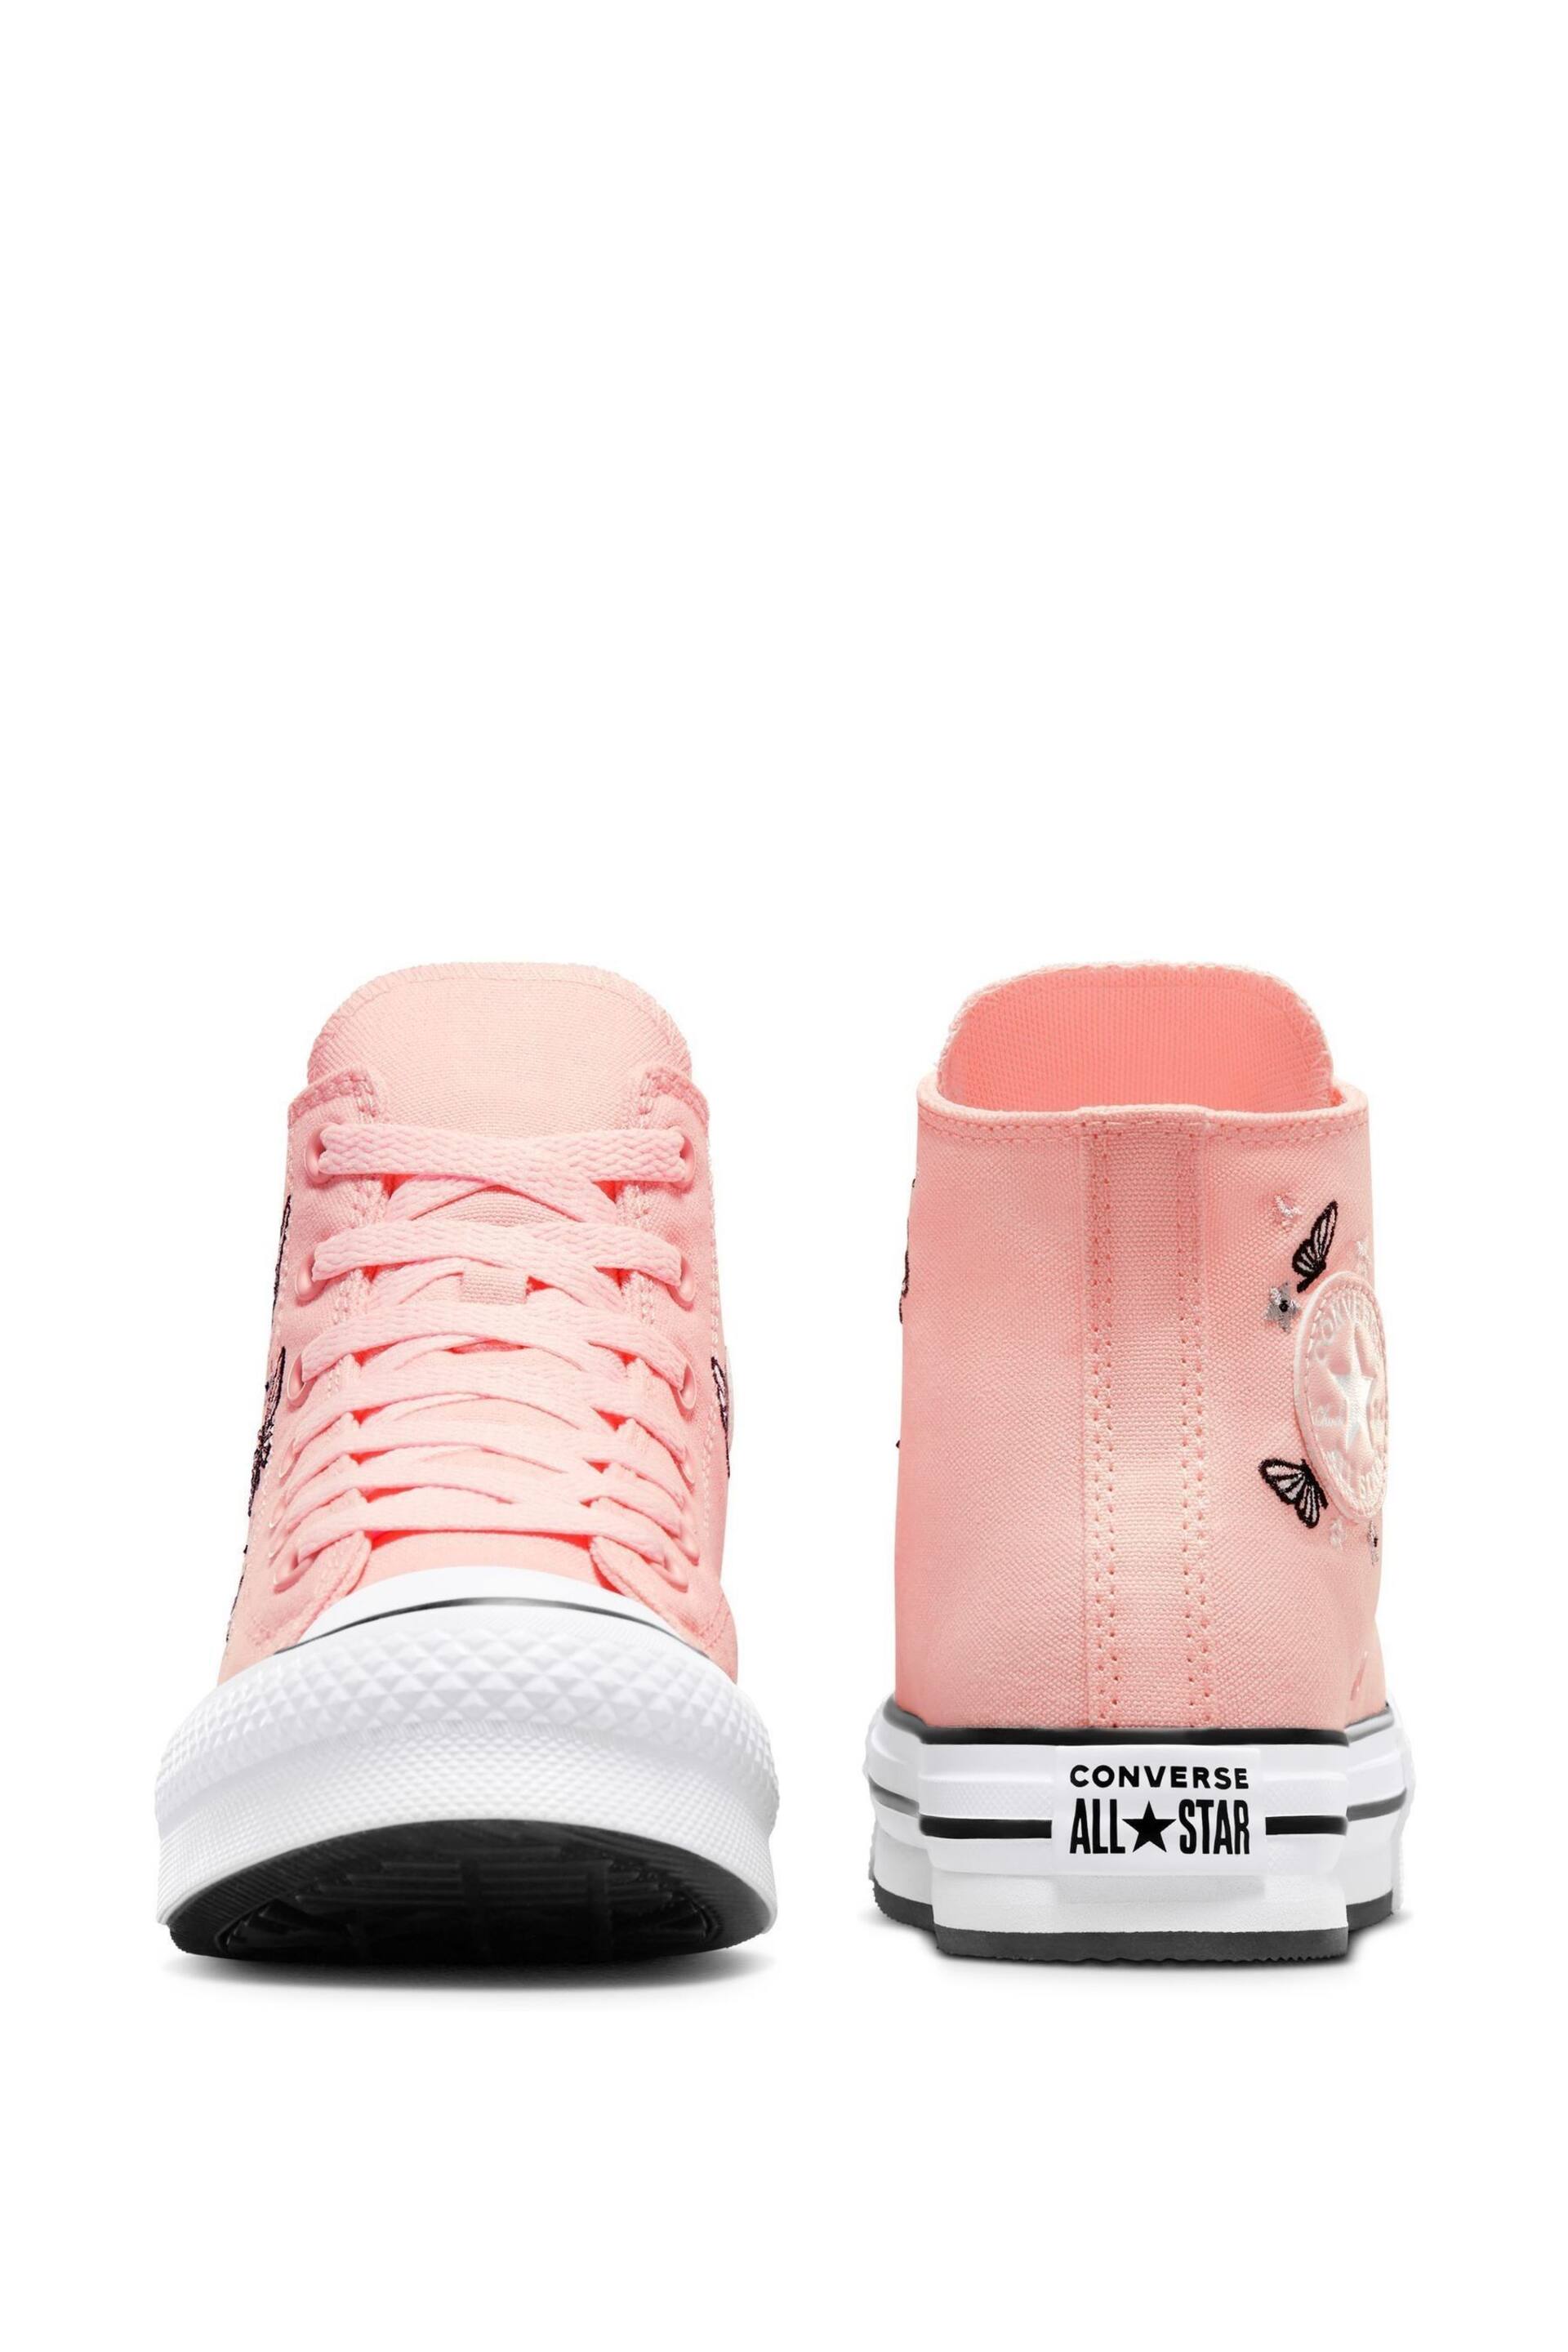 Converse Pink Butterfly Embroidered EVA Lift Youth Trainers - Image 7 of 9